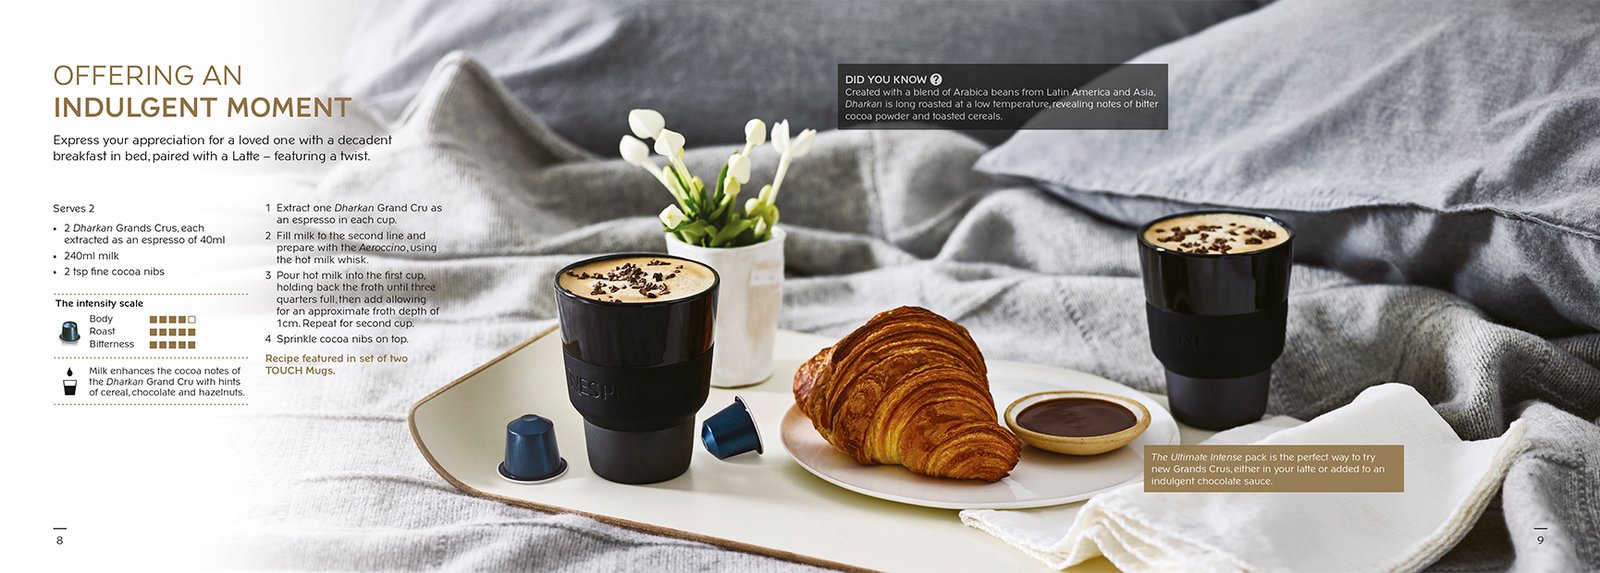 food beverage coffee commercial advertising photography